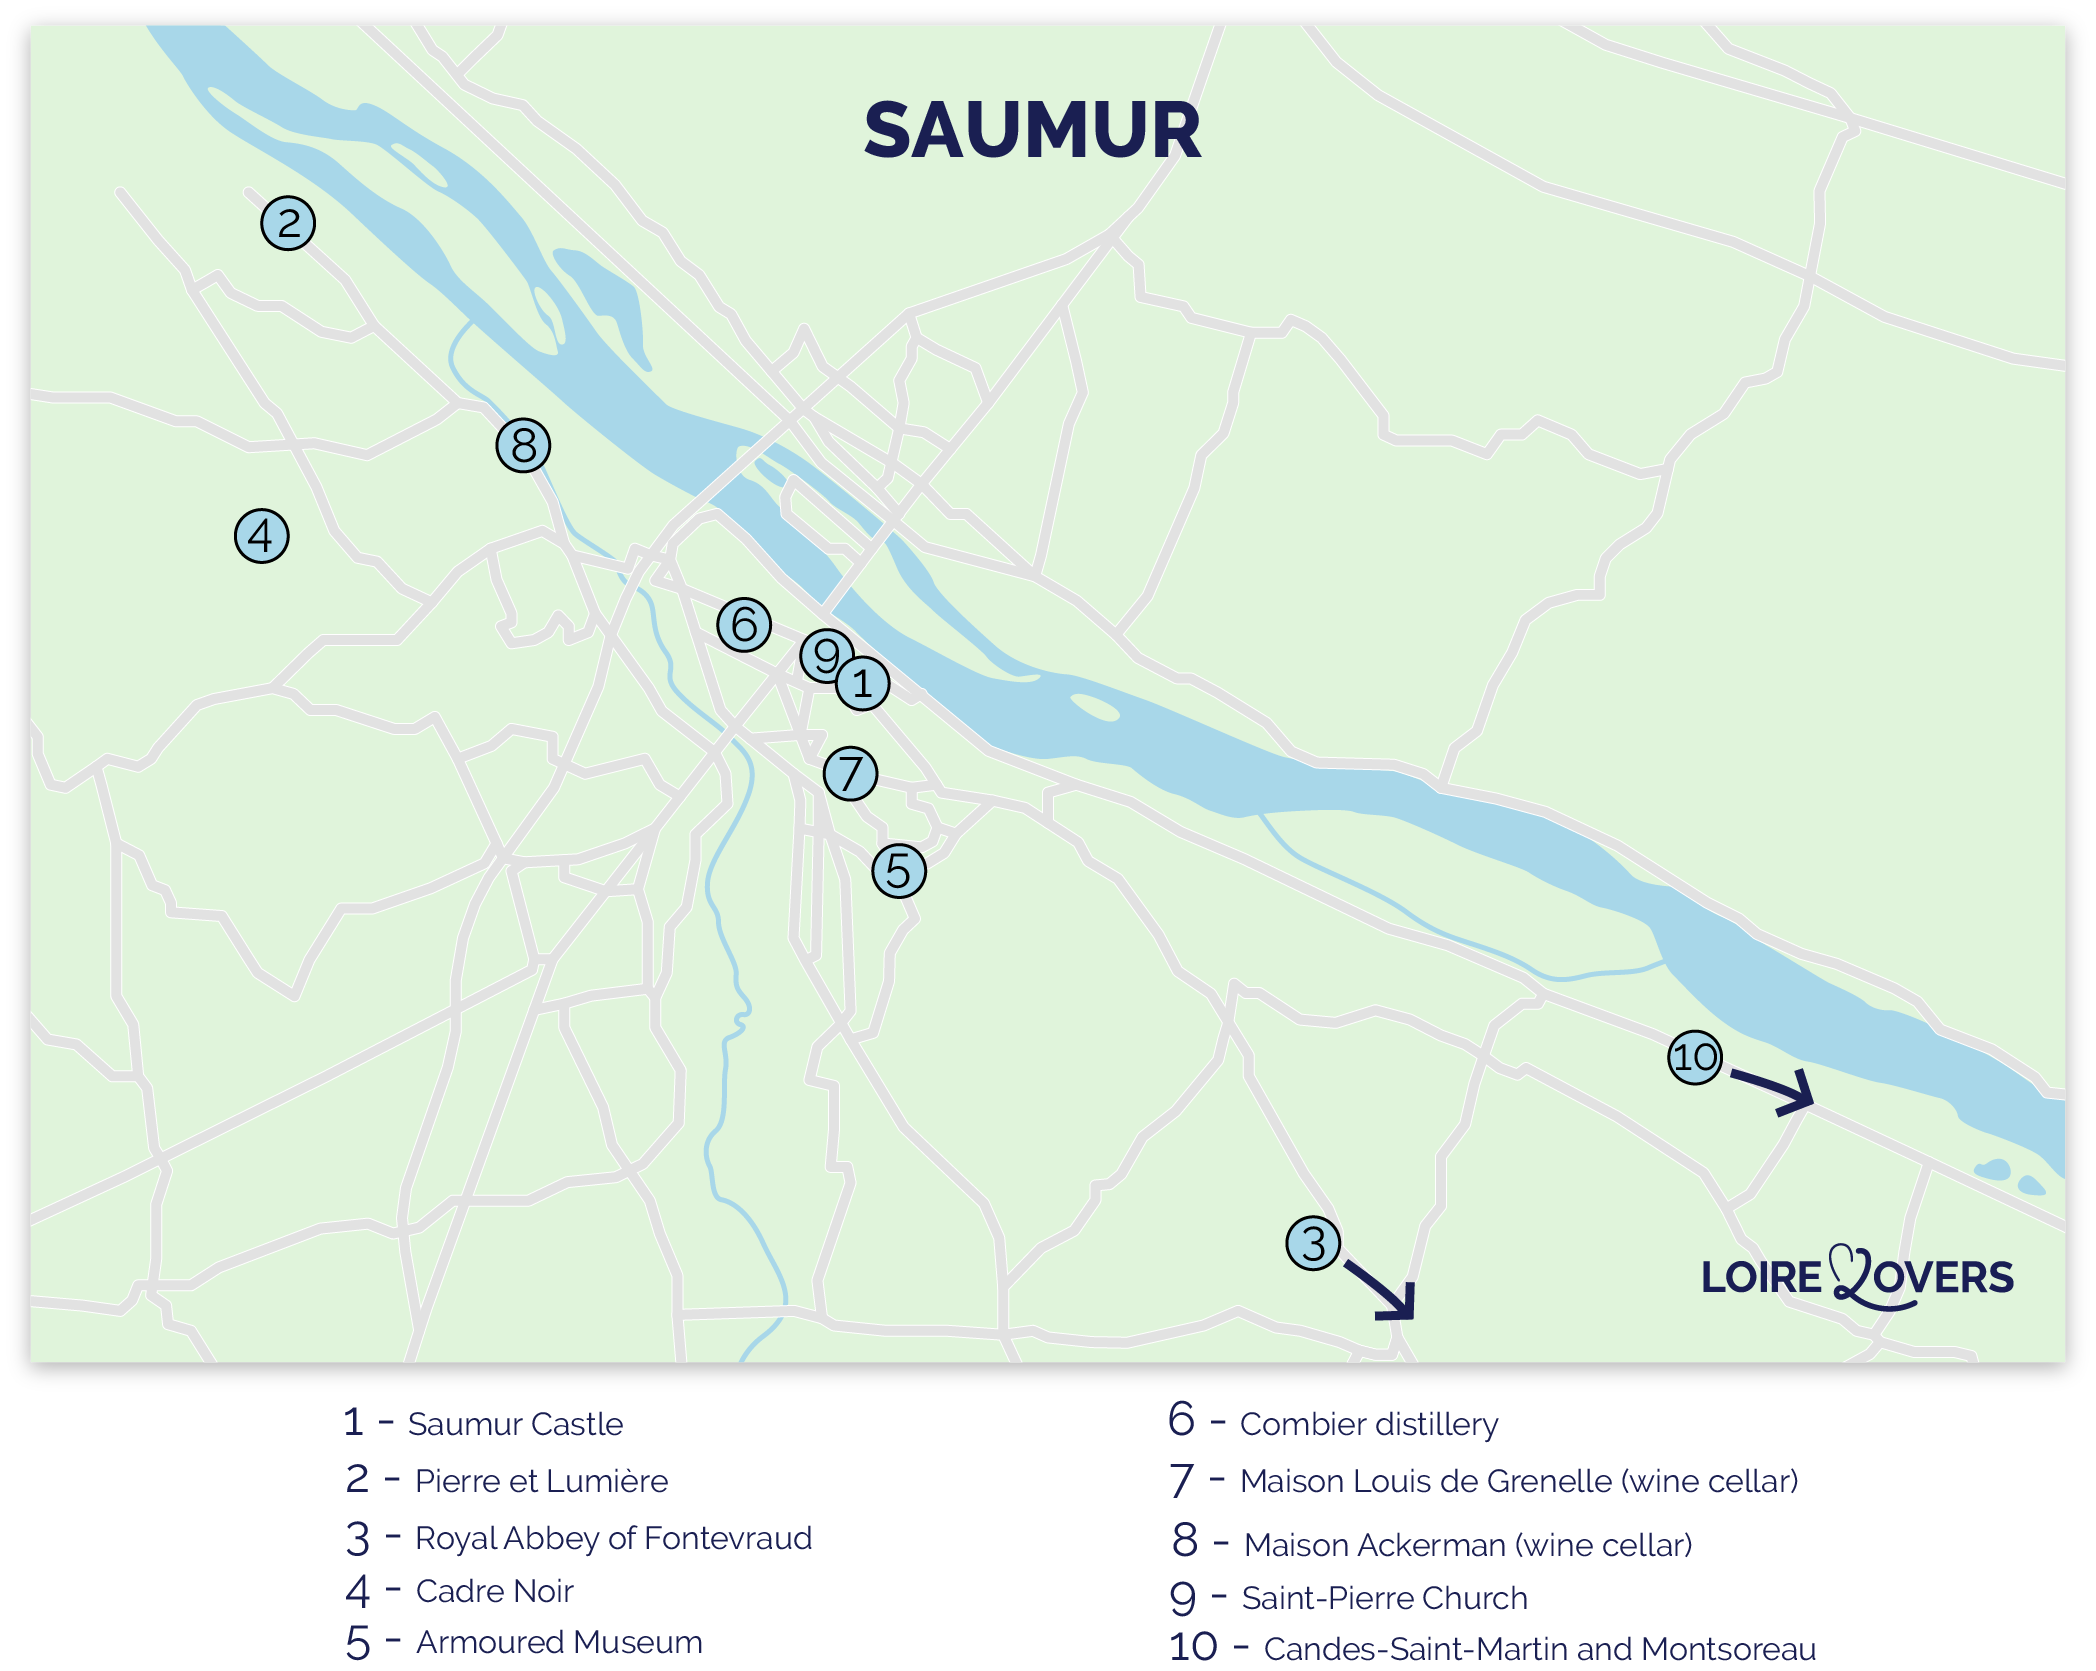 Map of must-see tourist attractions in and around Saumur.